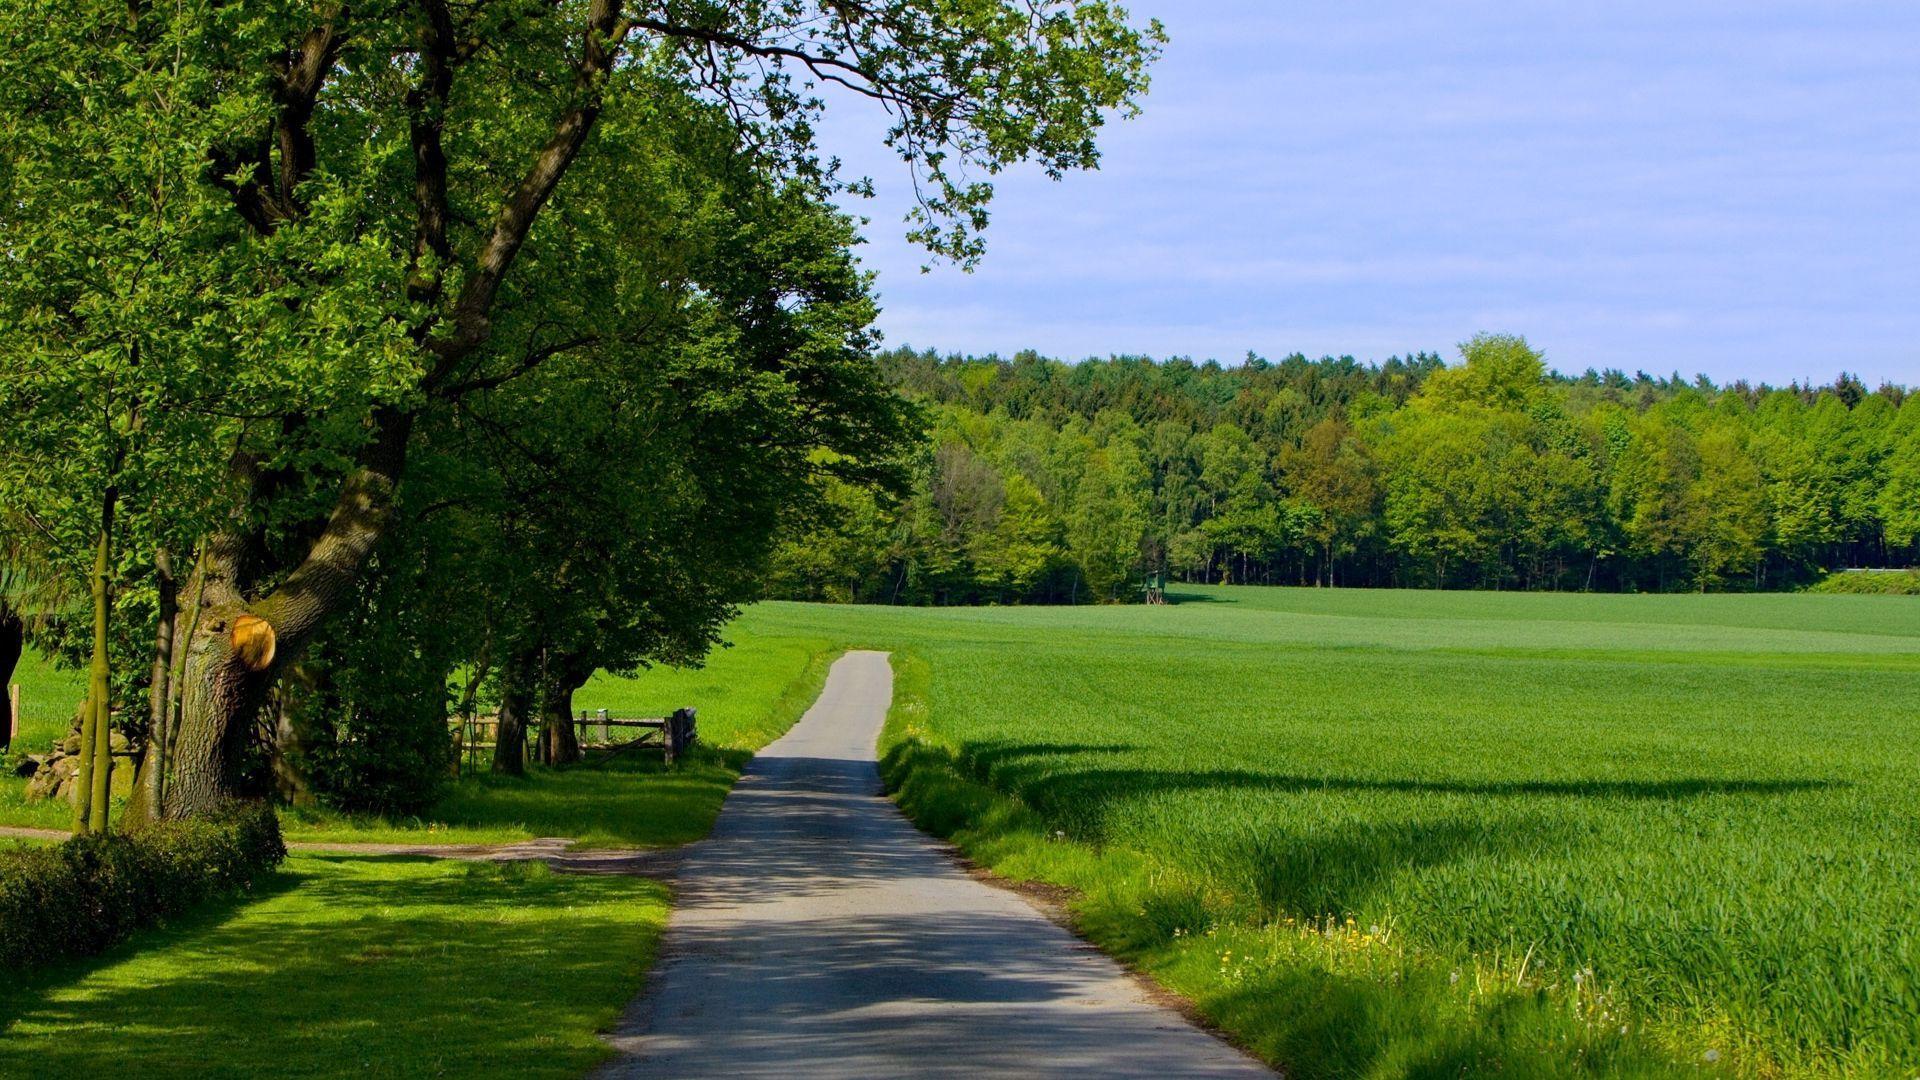 Countryside road on a summer day desktop wallpaper 29485